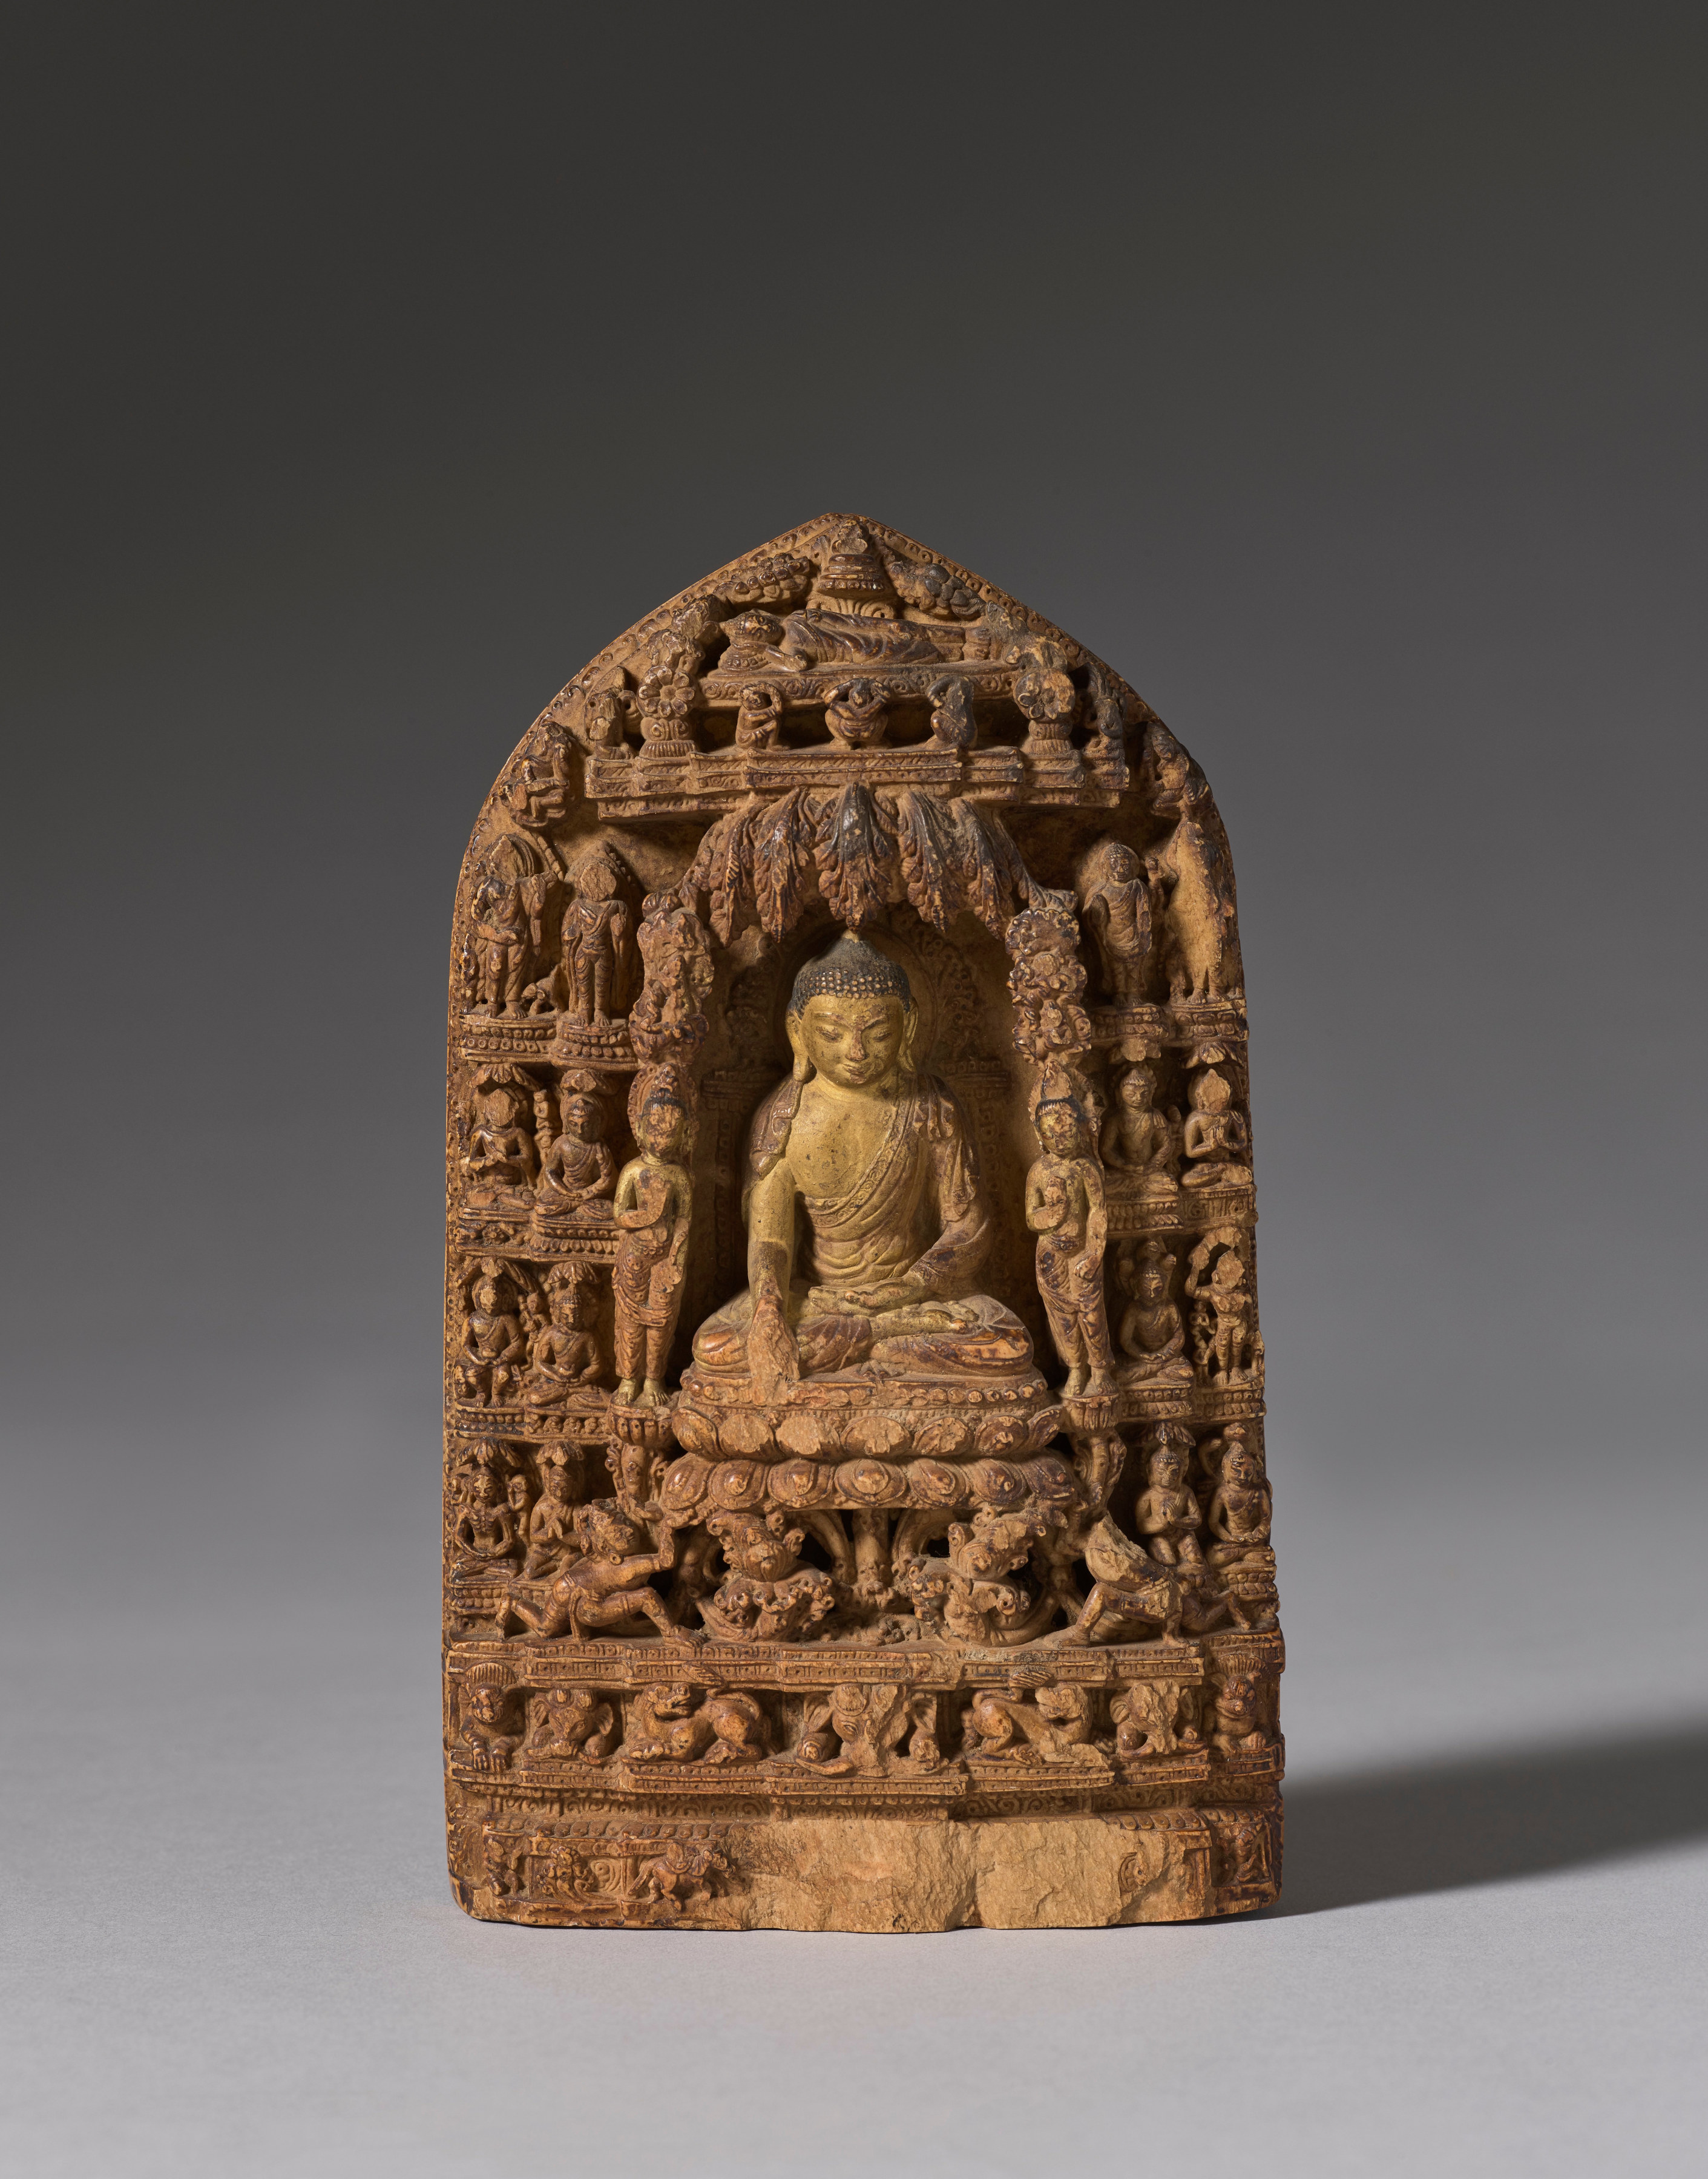 The central figure on this stele depicts the pivotal moment when Buddha triumphed over Mara, just before attaining enlightenment (larger photo)